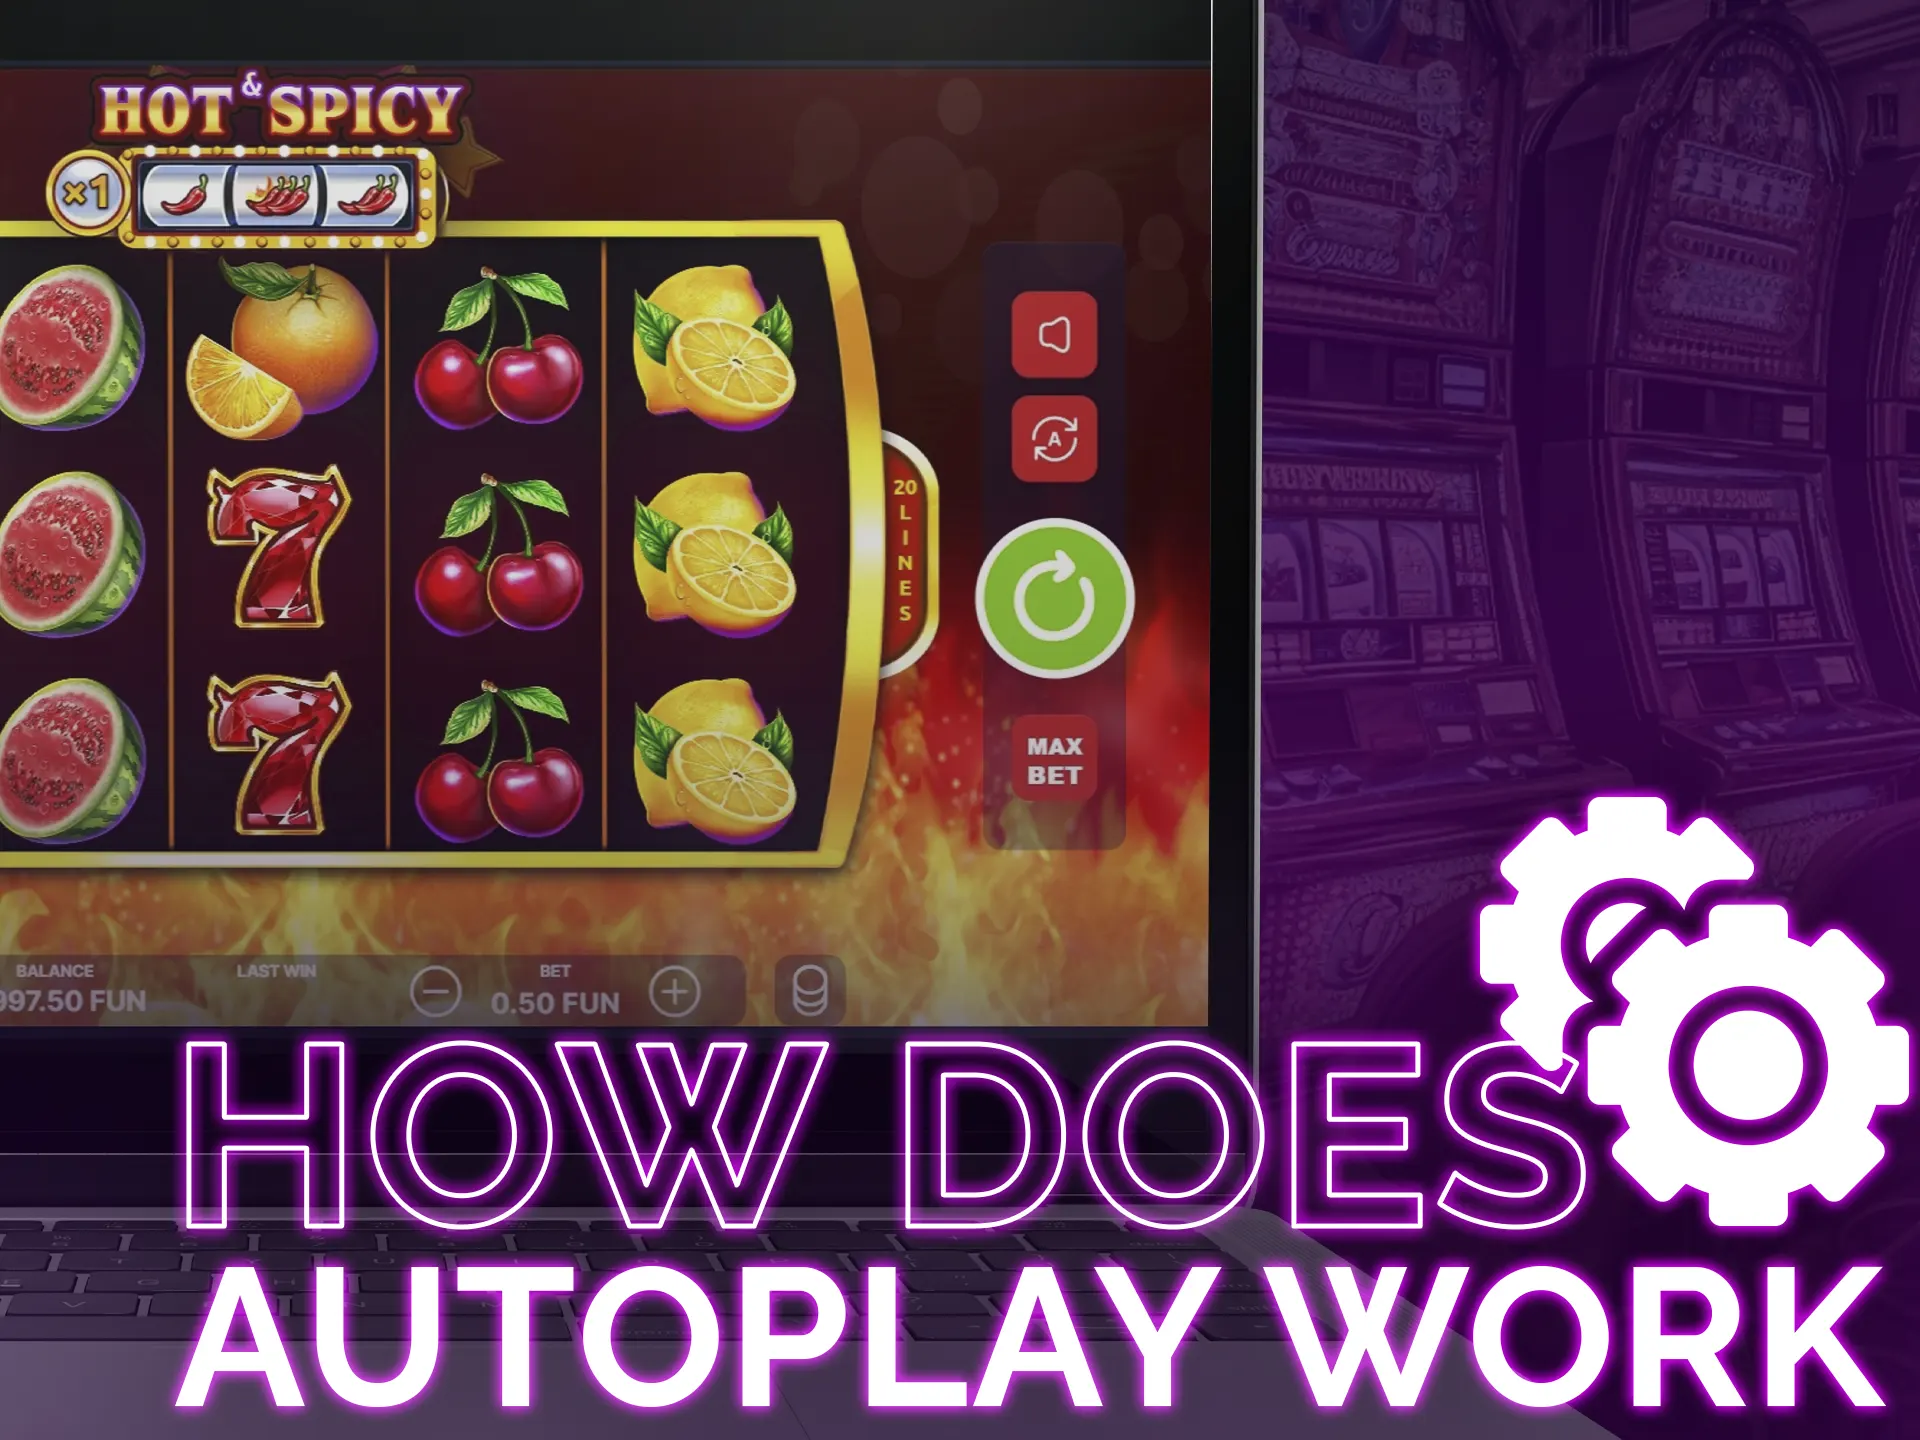 Autoplay in slots is activated through settings, allowing automated spins.